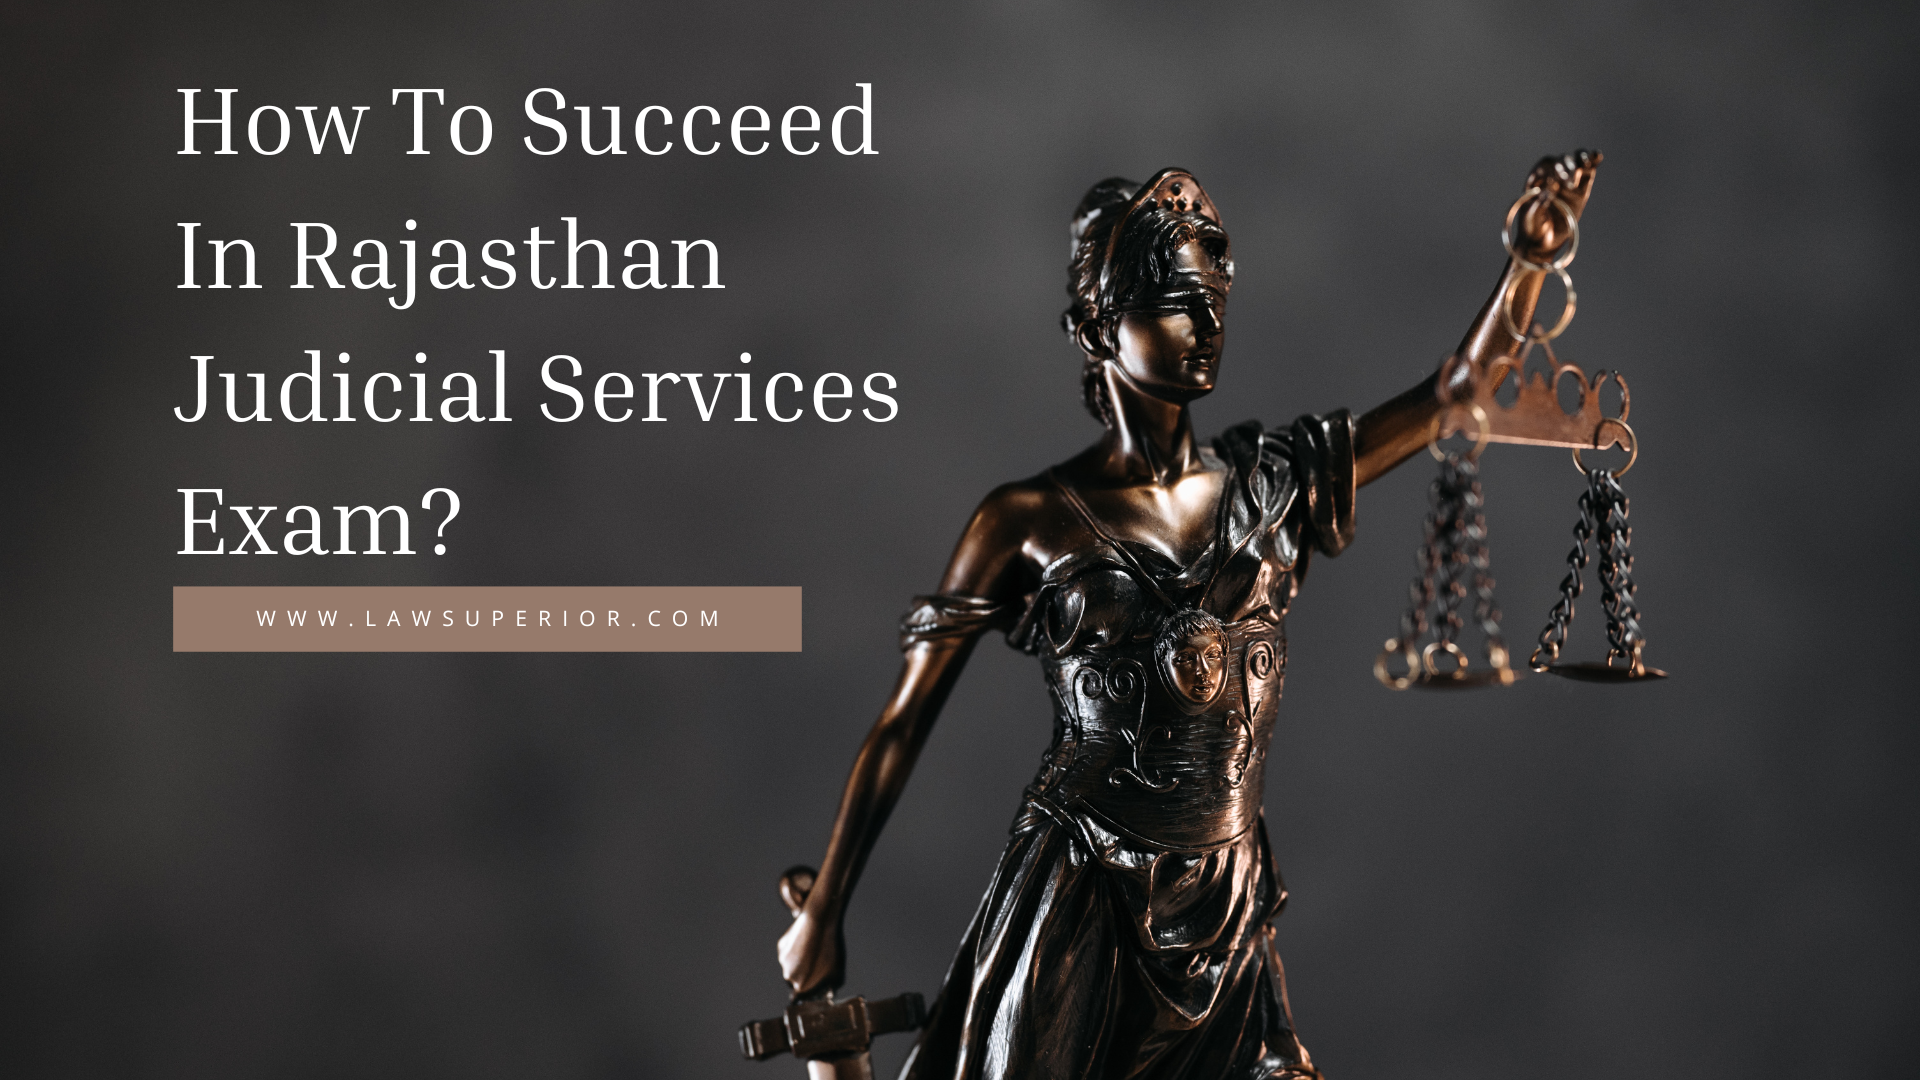 How To Succeed In Rajasthan Judicial Services Exam?